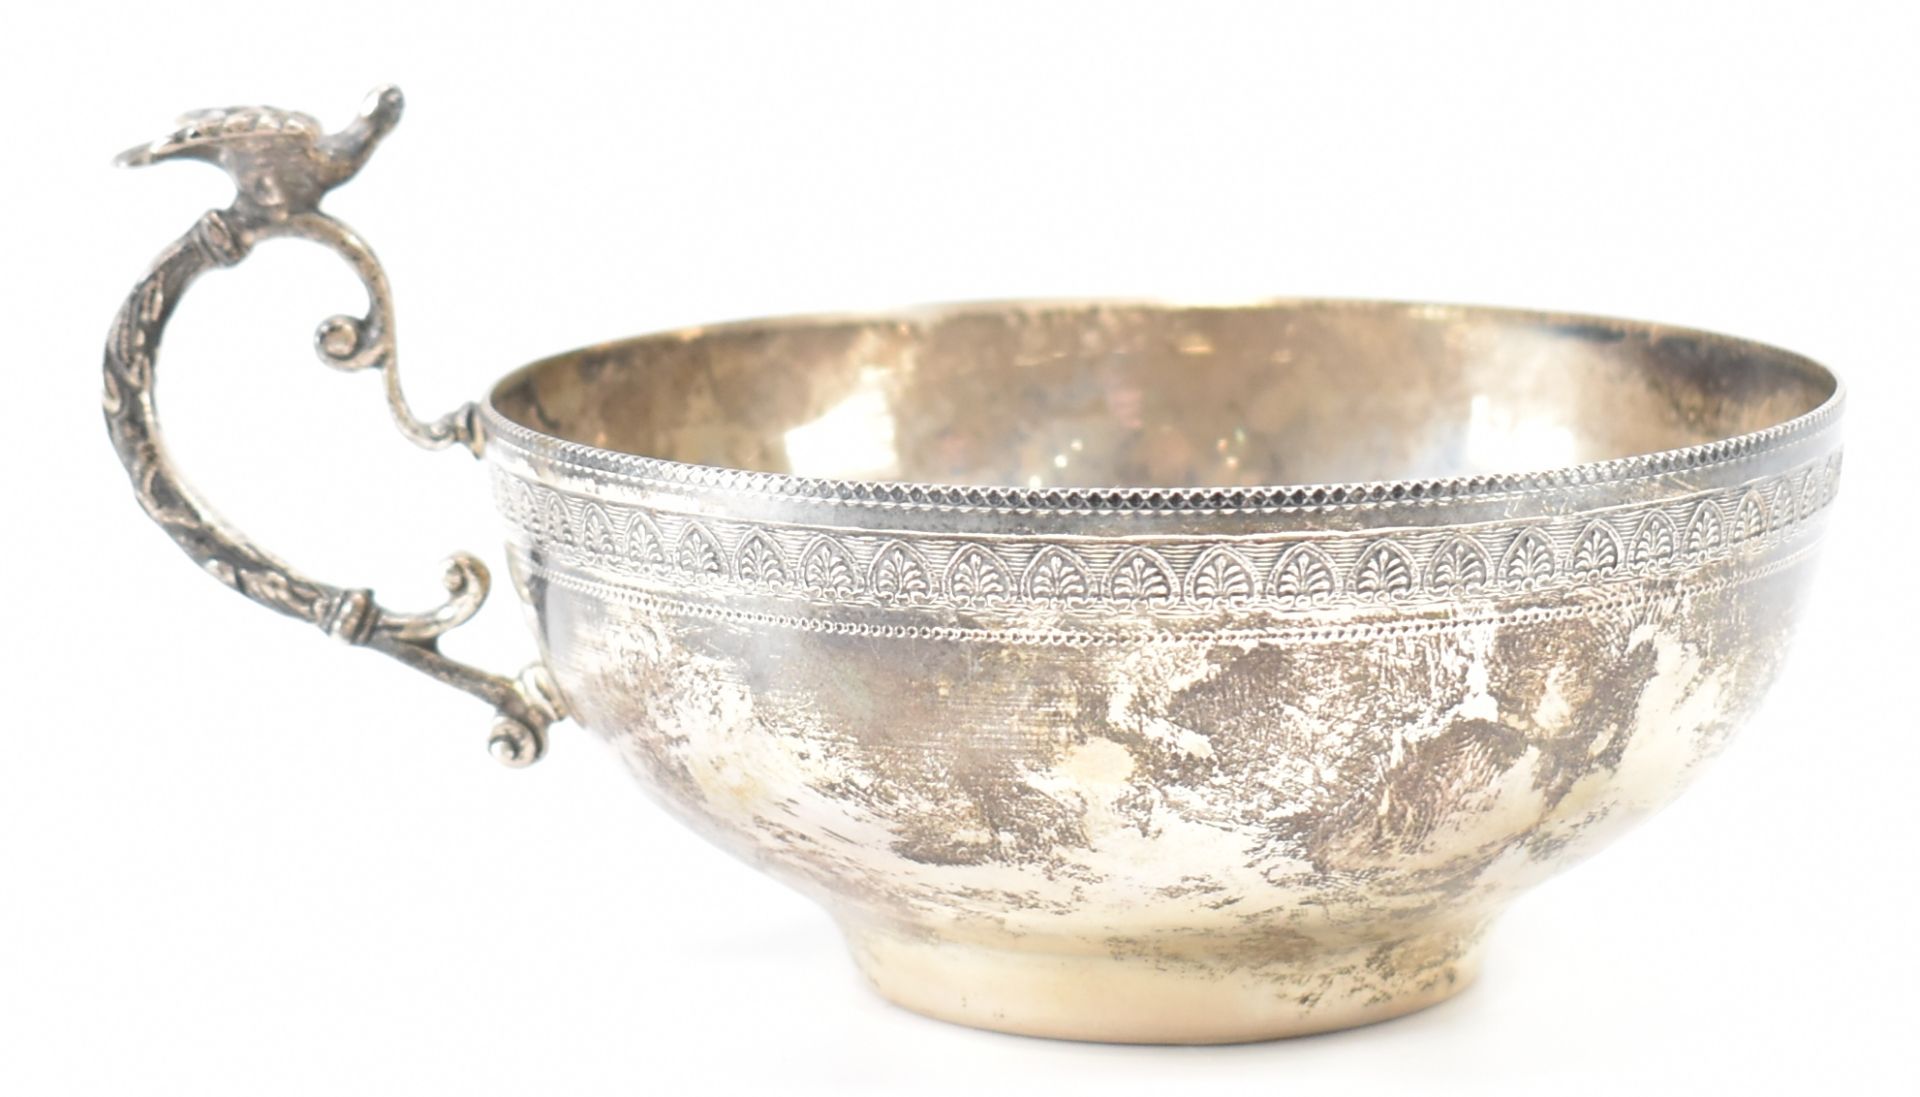 PERSIAN SILVER MIDDLE EASTERN SILVER BOWL - Image 2 of 4